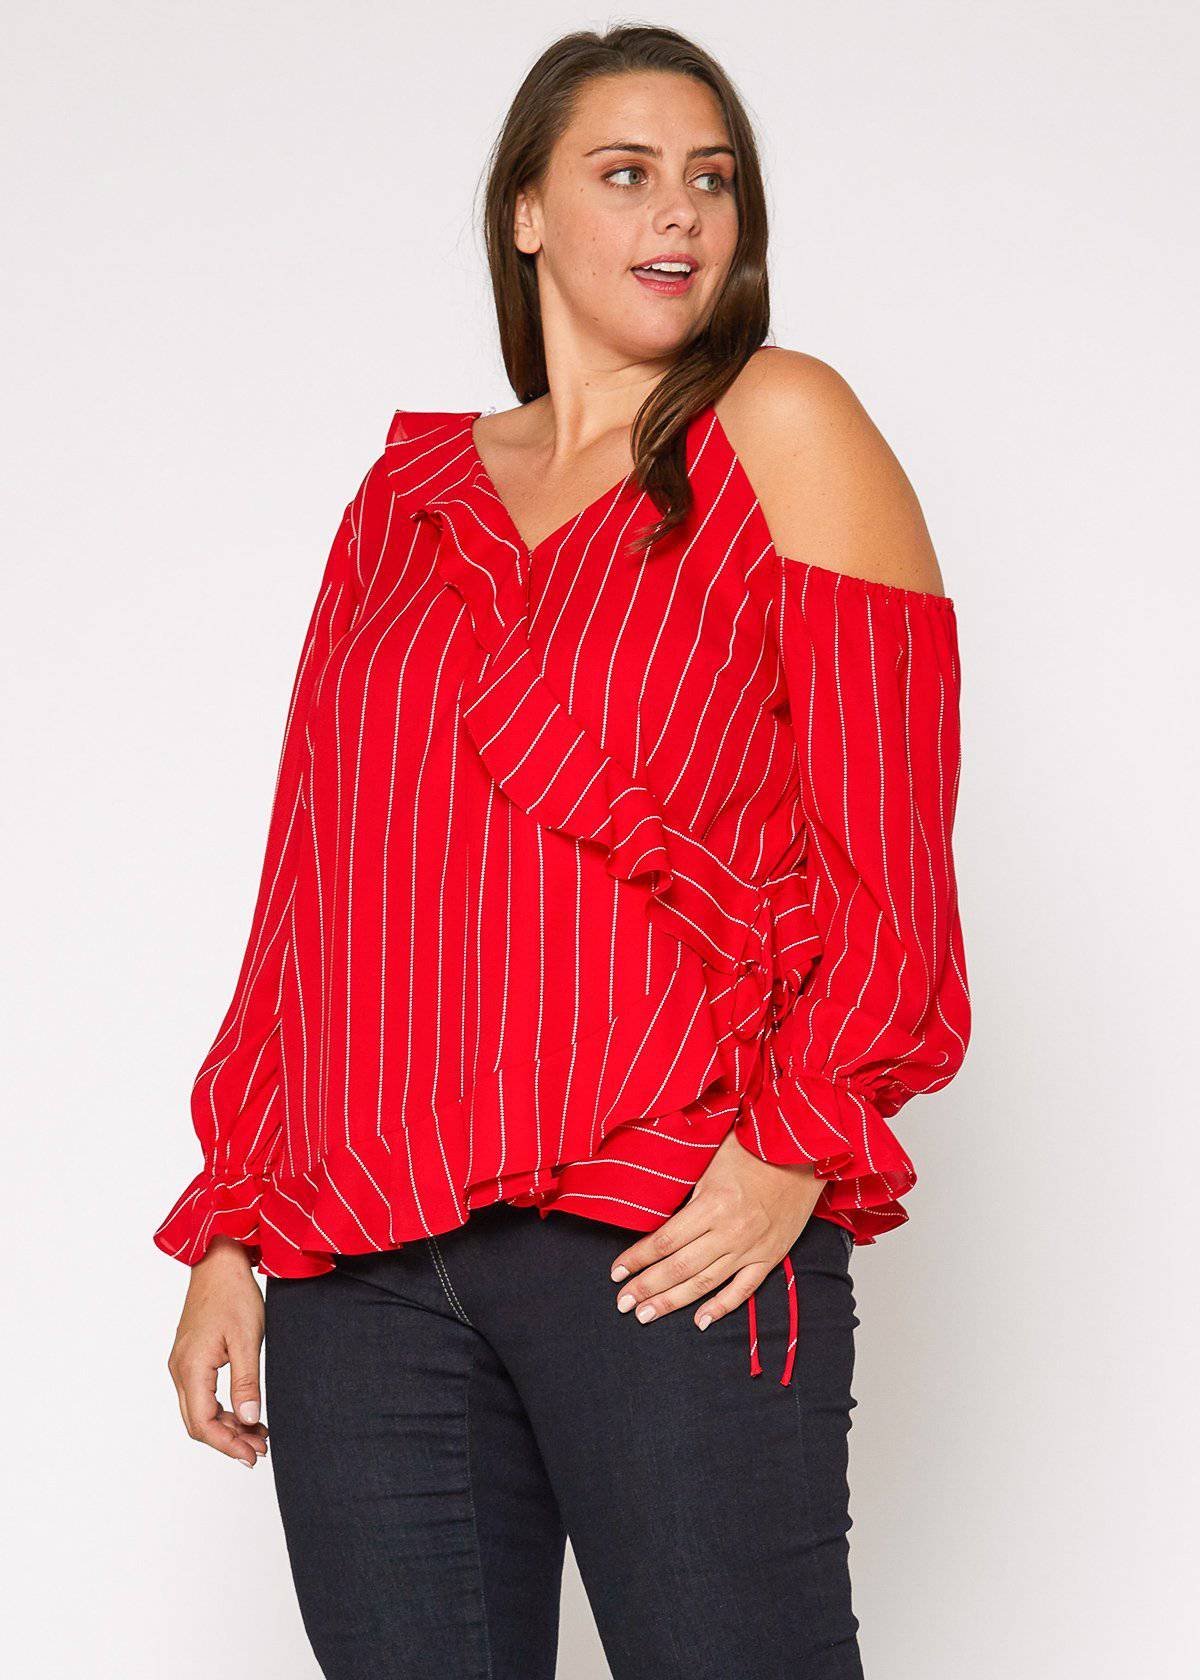 Plus Size Asymmetrical Shoulder Ruffle Blouse in Red by Shop at Konus